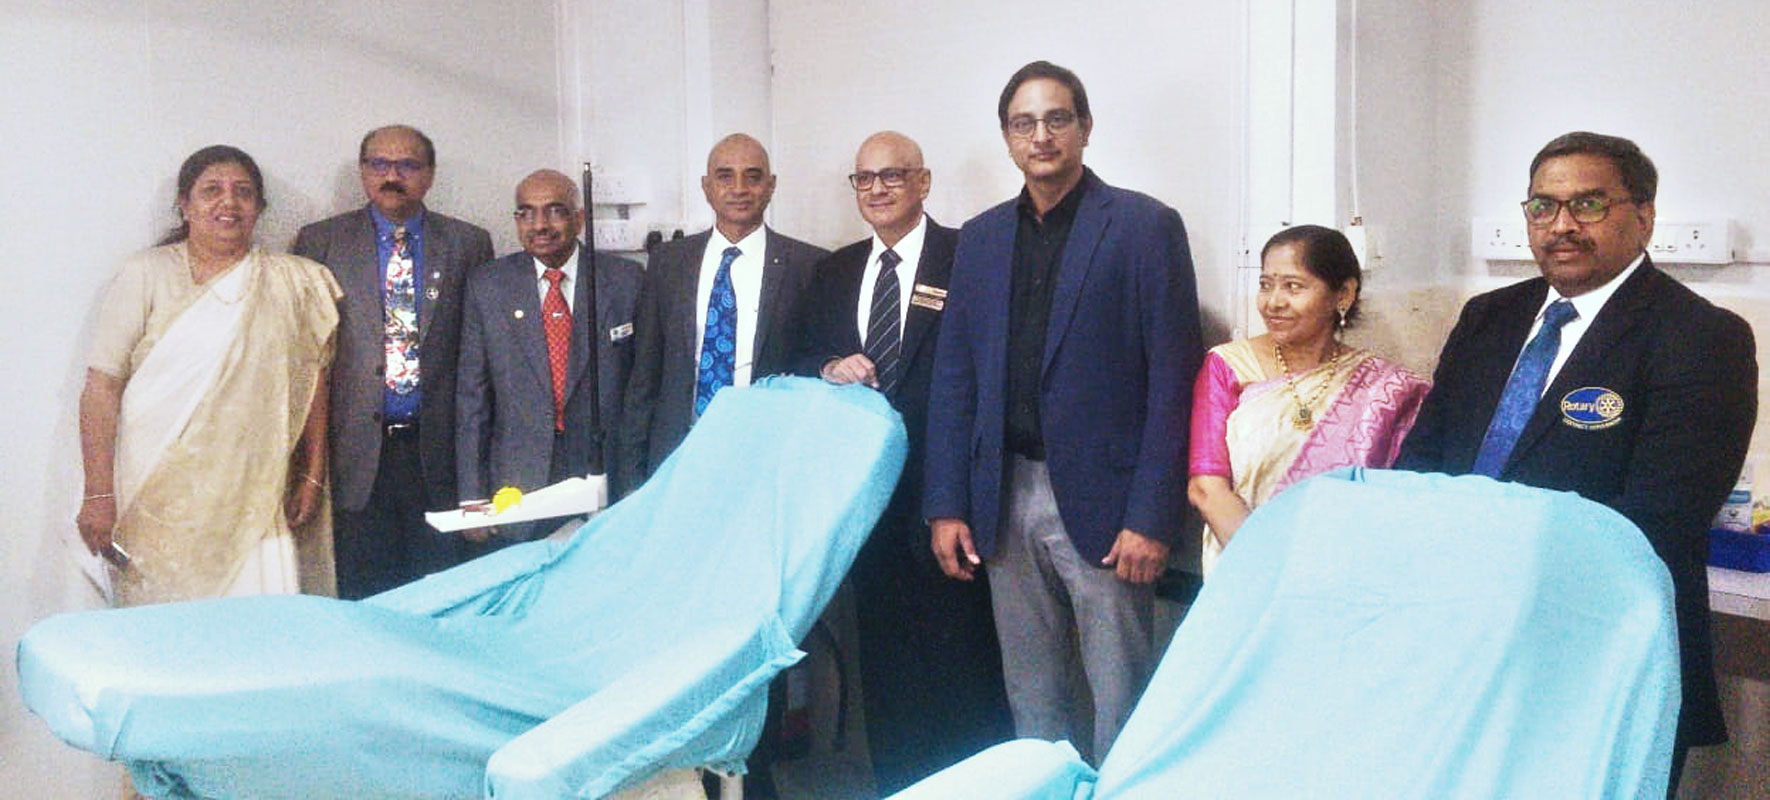 From L: Sharmila Jain, the blood bank’s managing trustee; Sailesh Gumidelli; assistant governor G S S Prakash; RC Hyderabad Deccan president Vandith Reddy; DGN Sharath Choudhary; Dr Ramesh, MD, Zoi Hospitals; DG Rajasekhar Reddy Talla and his spouse Uma Devi at the Rotary Challa Blood Bank.